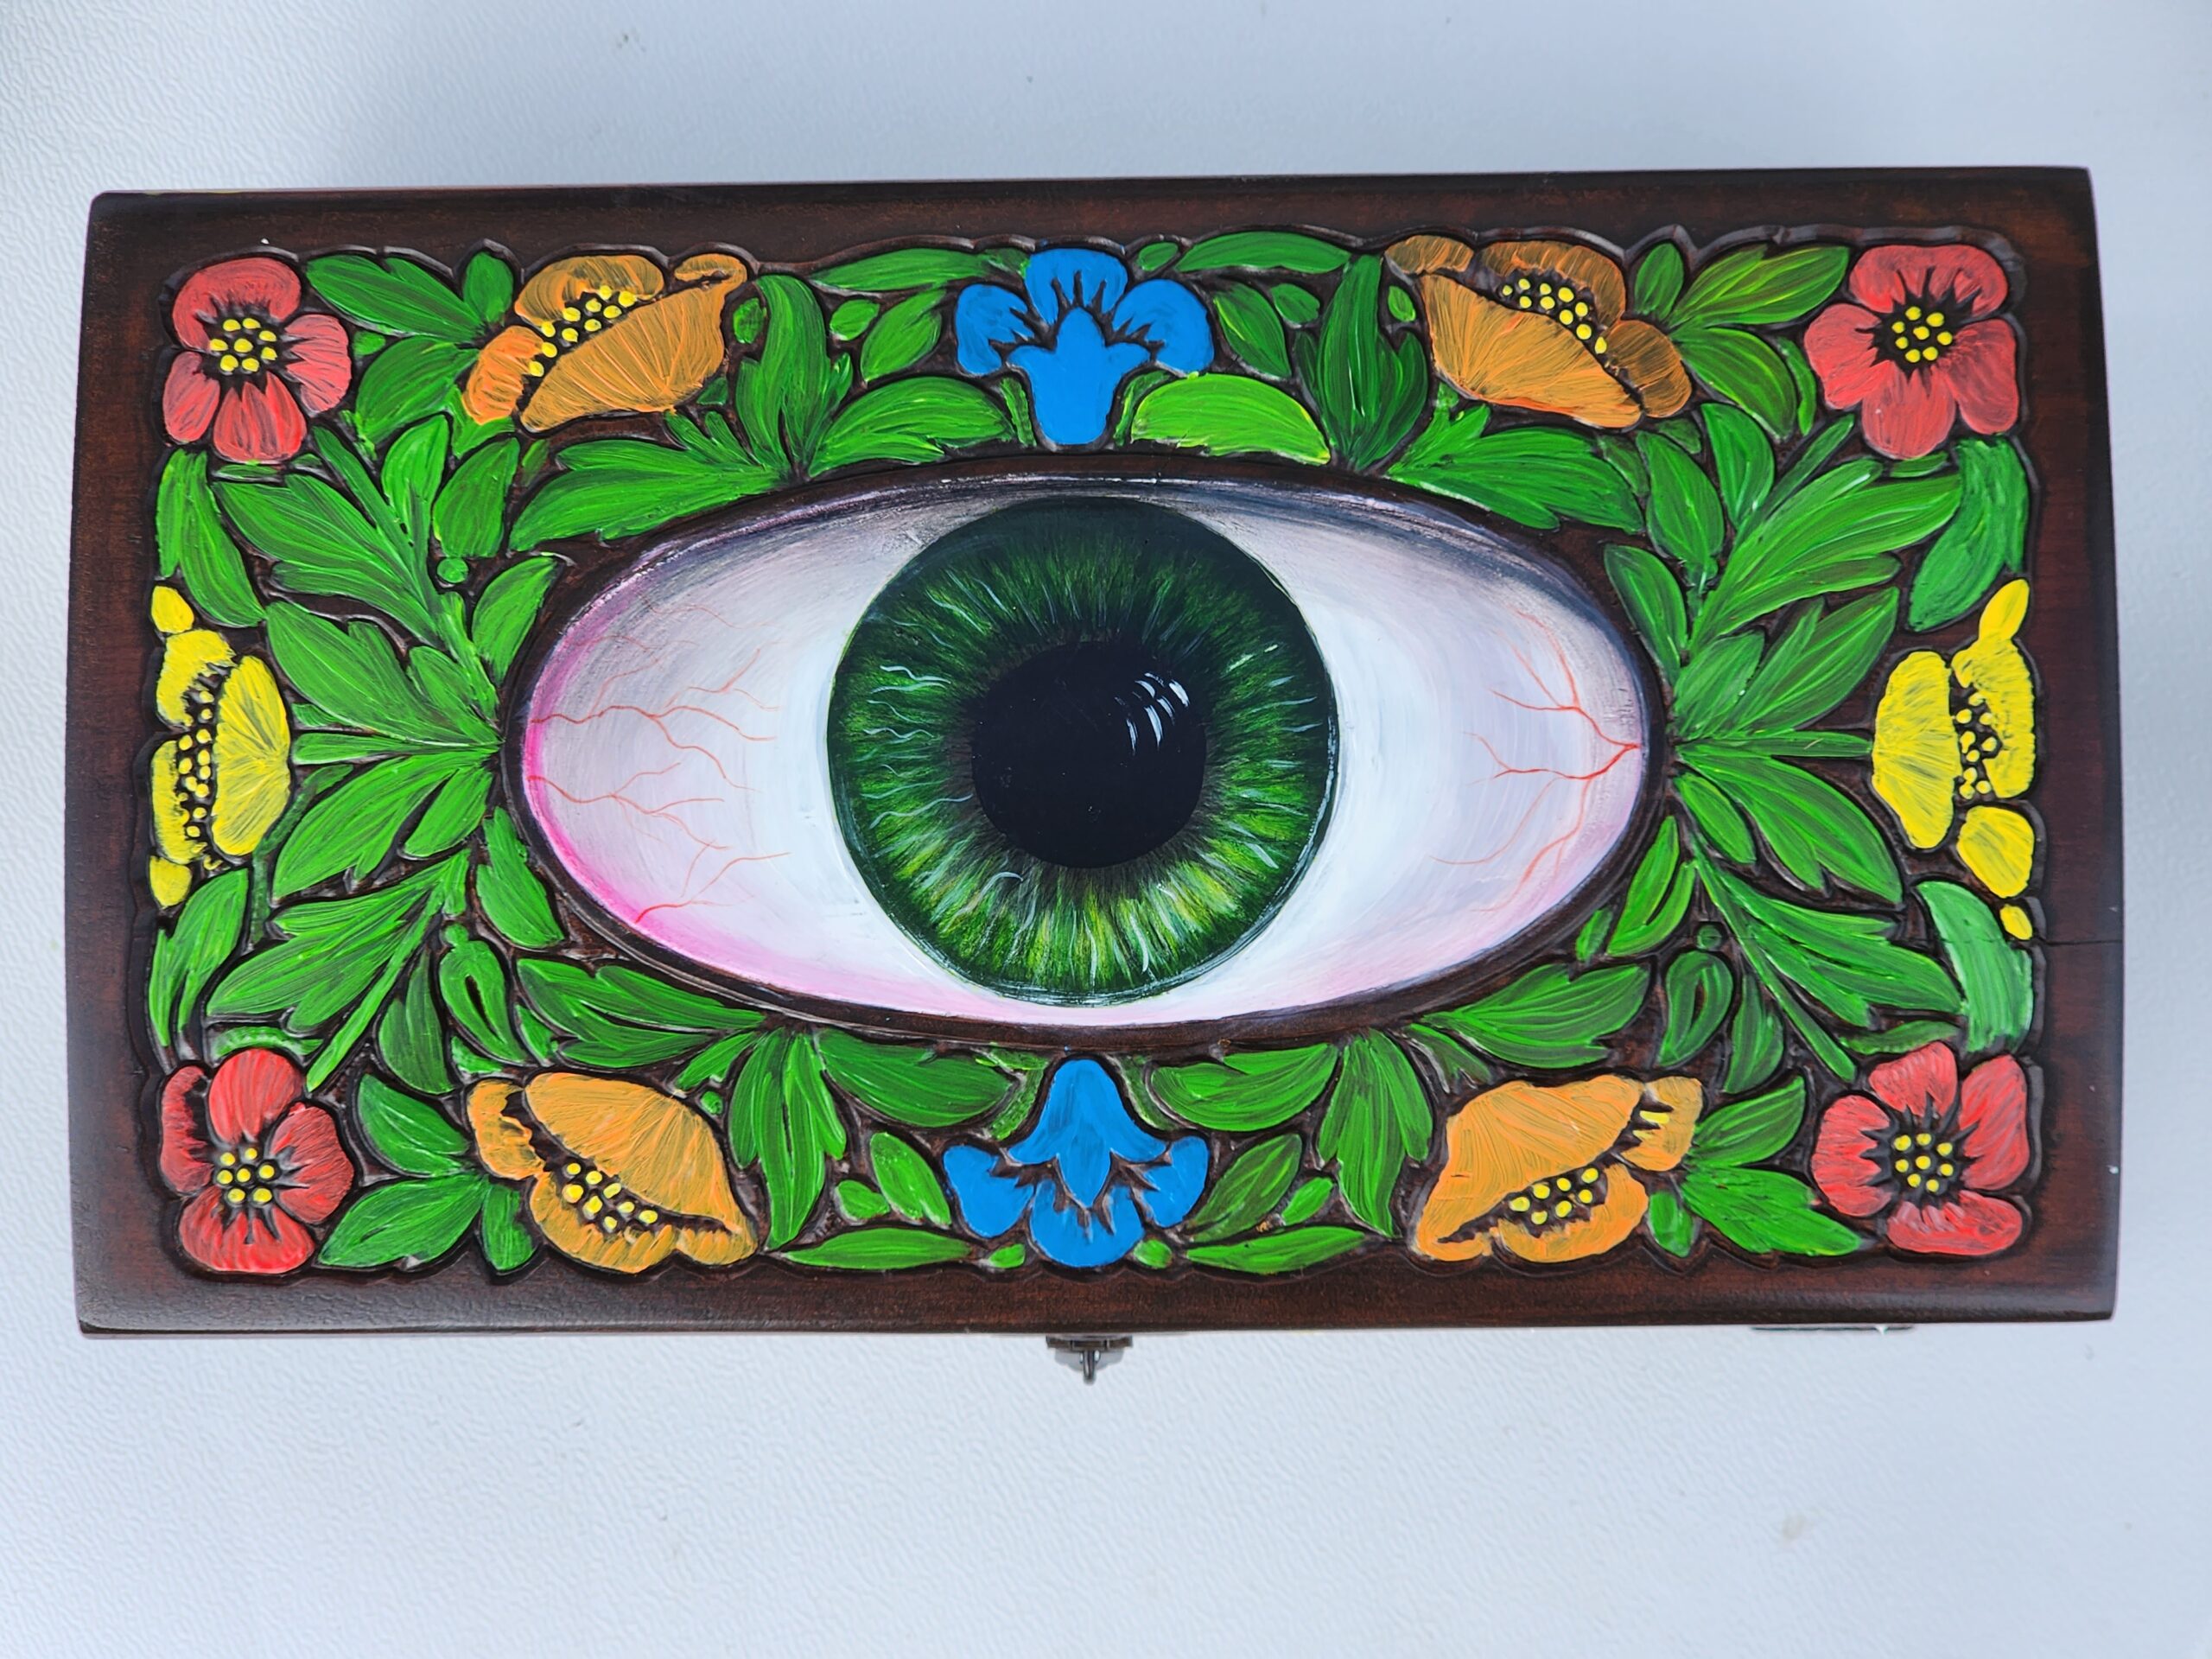 Beautiful handpainted antique wooden trinket box with original mirror. This cute trinket box is an ideal gift for a special loved one. You can store jewelry such as rings, necklaces, bracelets, or anything you would like to keep in a particular place, especially in this elegant and artistic trinket box.